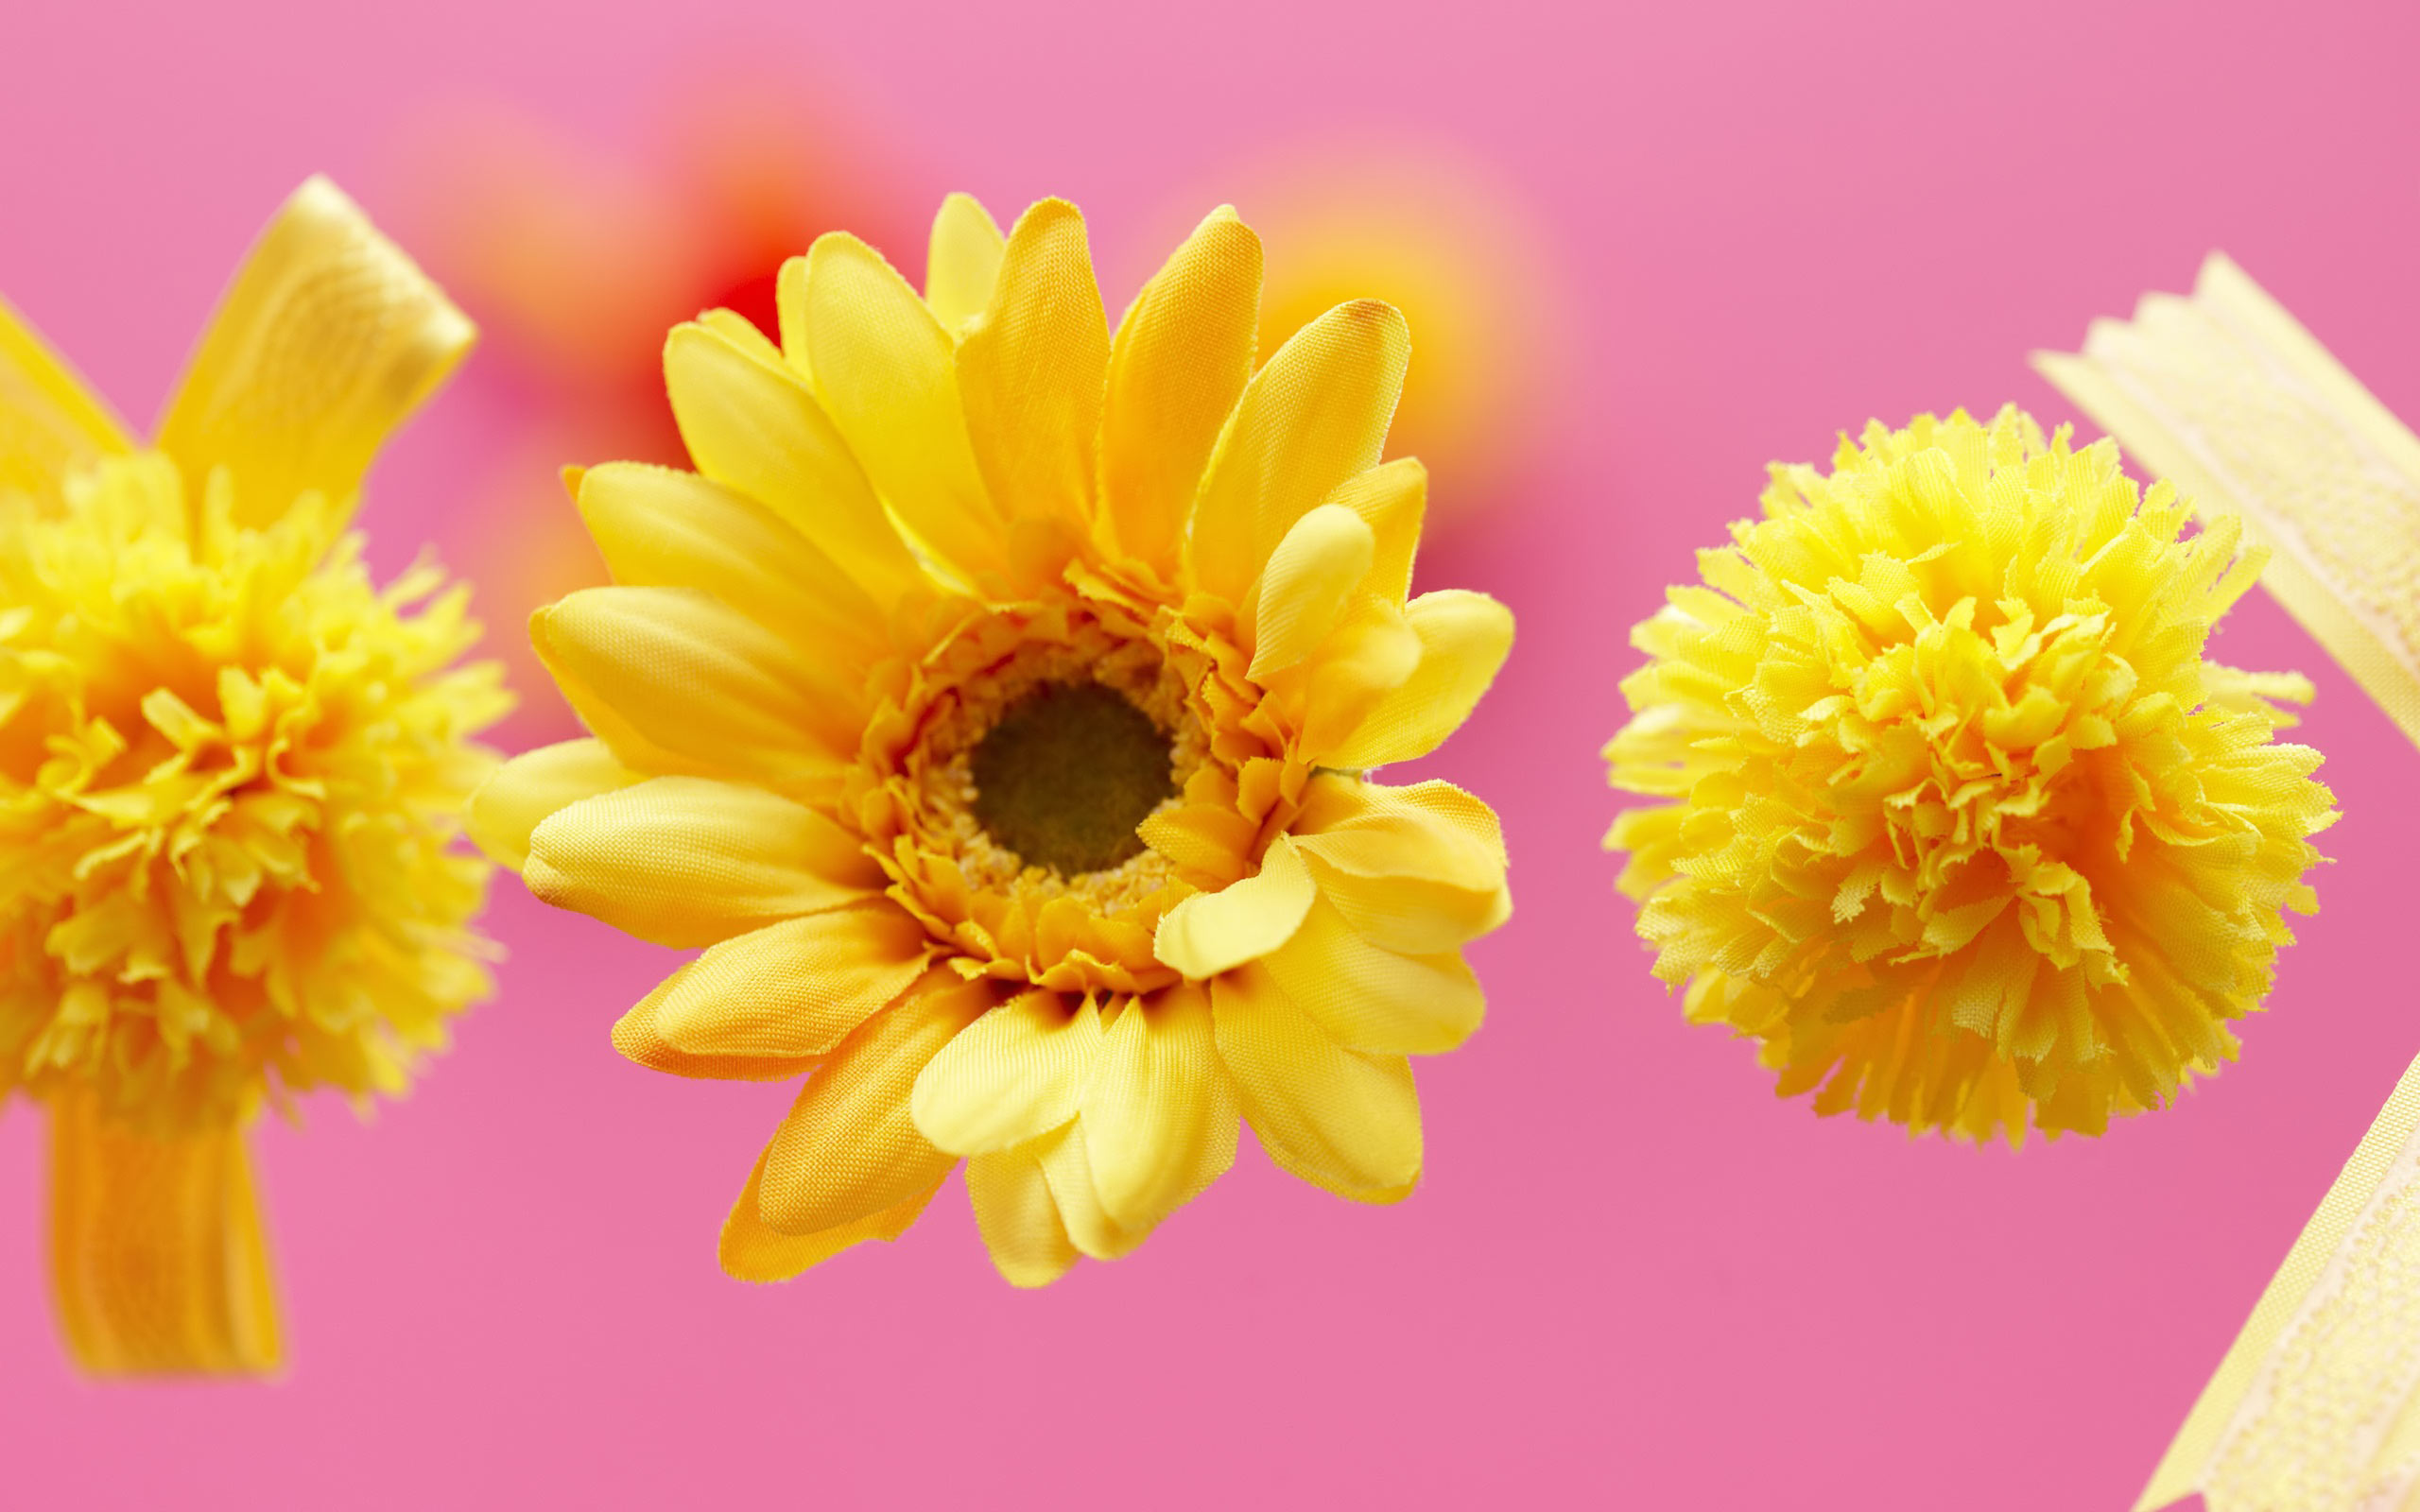 Great Yellow Flower Wallpaper Full HD Pictures